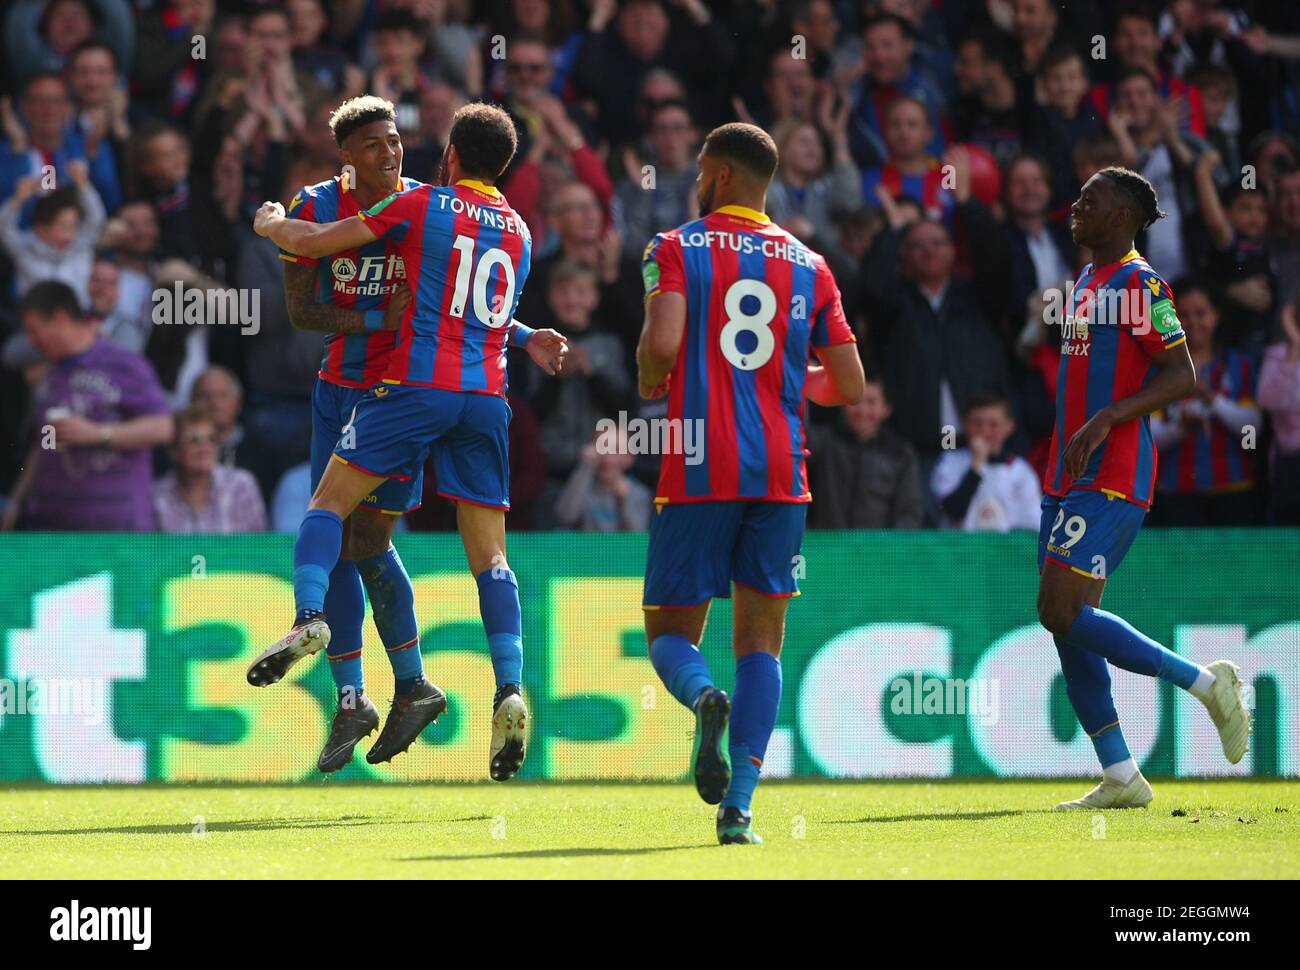 Soccer Football - Premier League - Crystal Palace vs West Bromwich Albion - Selhurst Park, London, Britain - May 13, 2018   Crystal Palace's Patrick van Aanholt celebrates scoring their second goal with team mates    REUTERS/Hannah McKay    EDITORIAL USE ONLY. No use with unauthorized audio, video, data, fixture lists, club/league logos or "live" services. Online in-match use limited to 75 images, no video emulation. No use in betting, games or single club/league/player publications.  Please contact your account representative for further details. Stock Photo